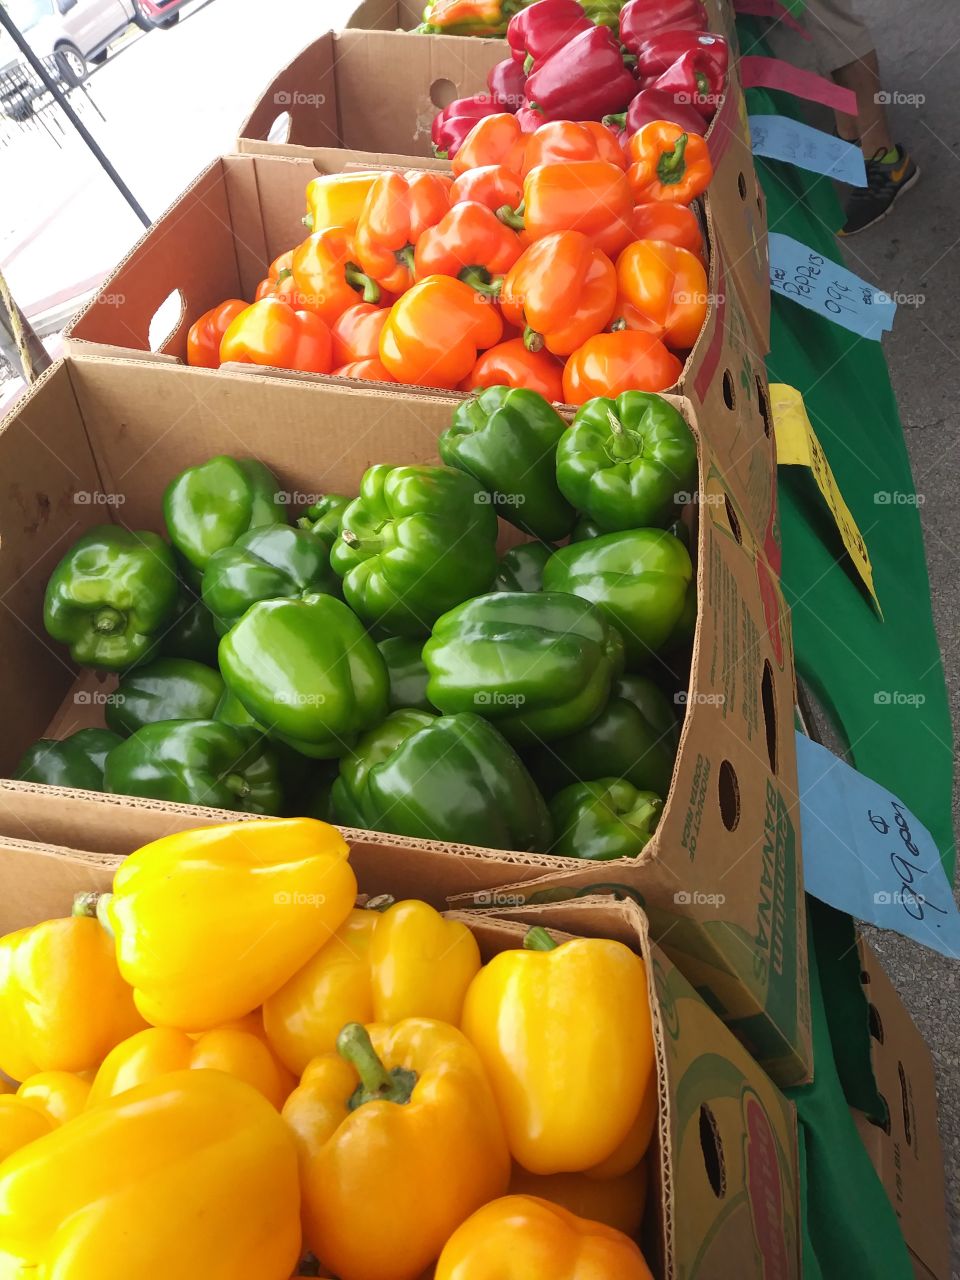 Peppers at Farmers Market stand